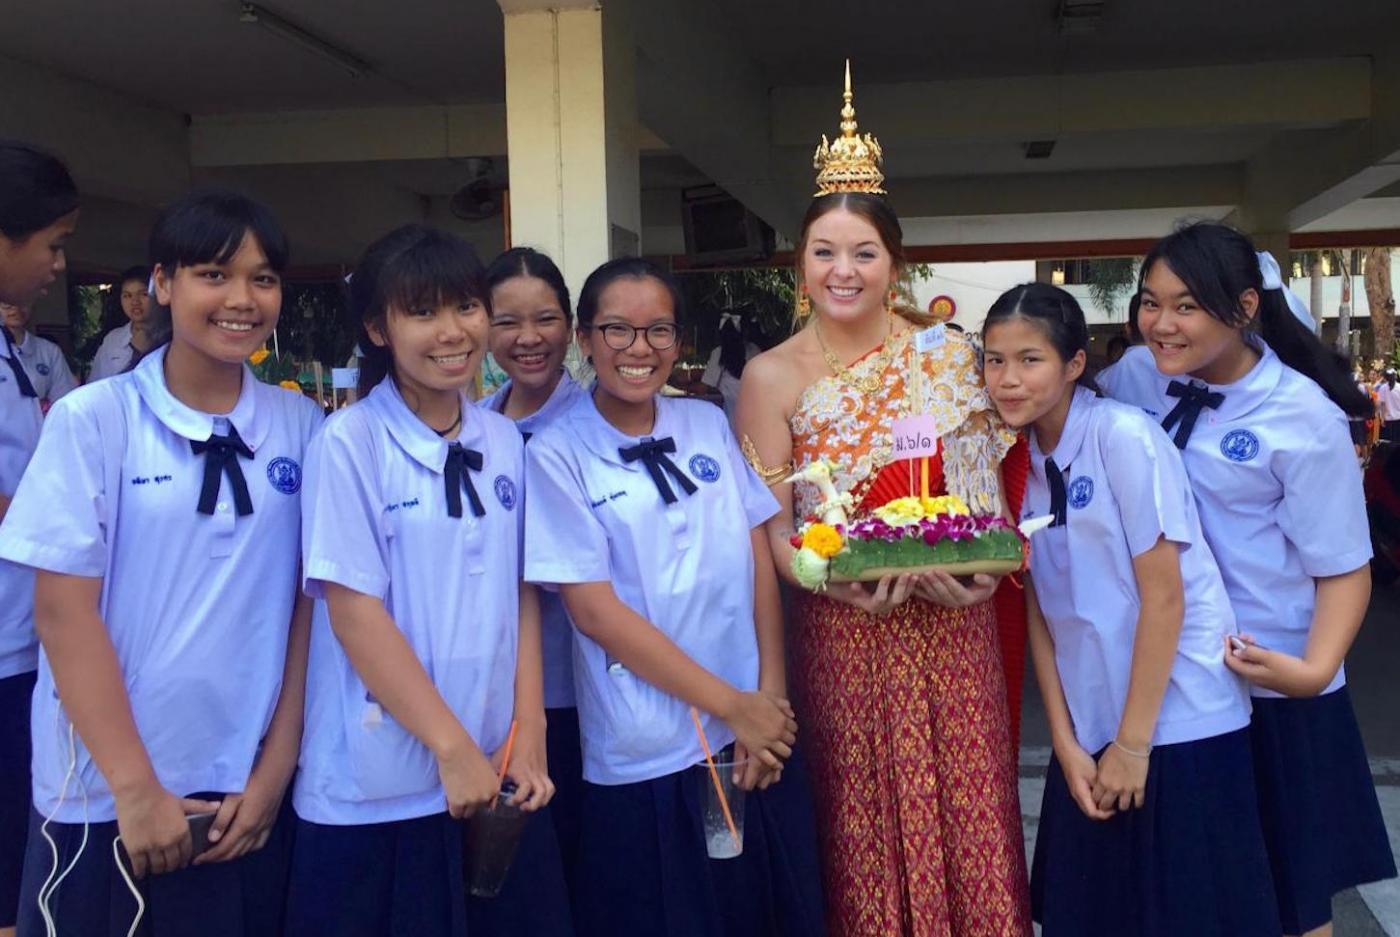 Kelly with students at her previous school in Bangkok, Thailand.